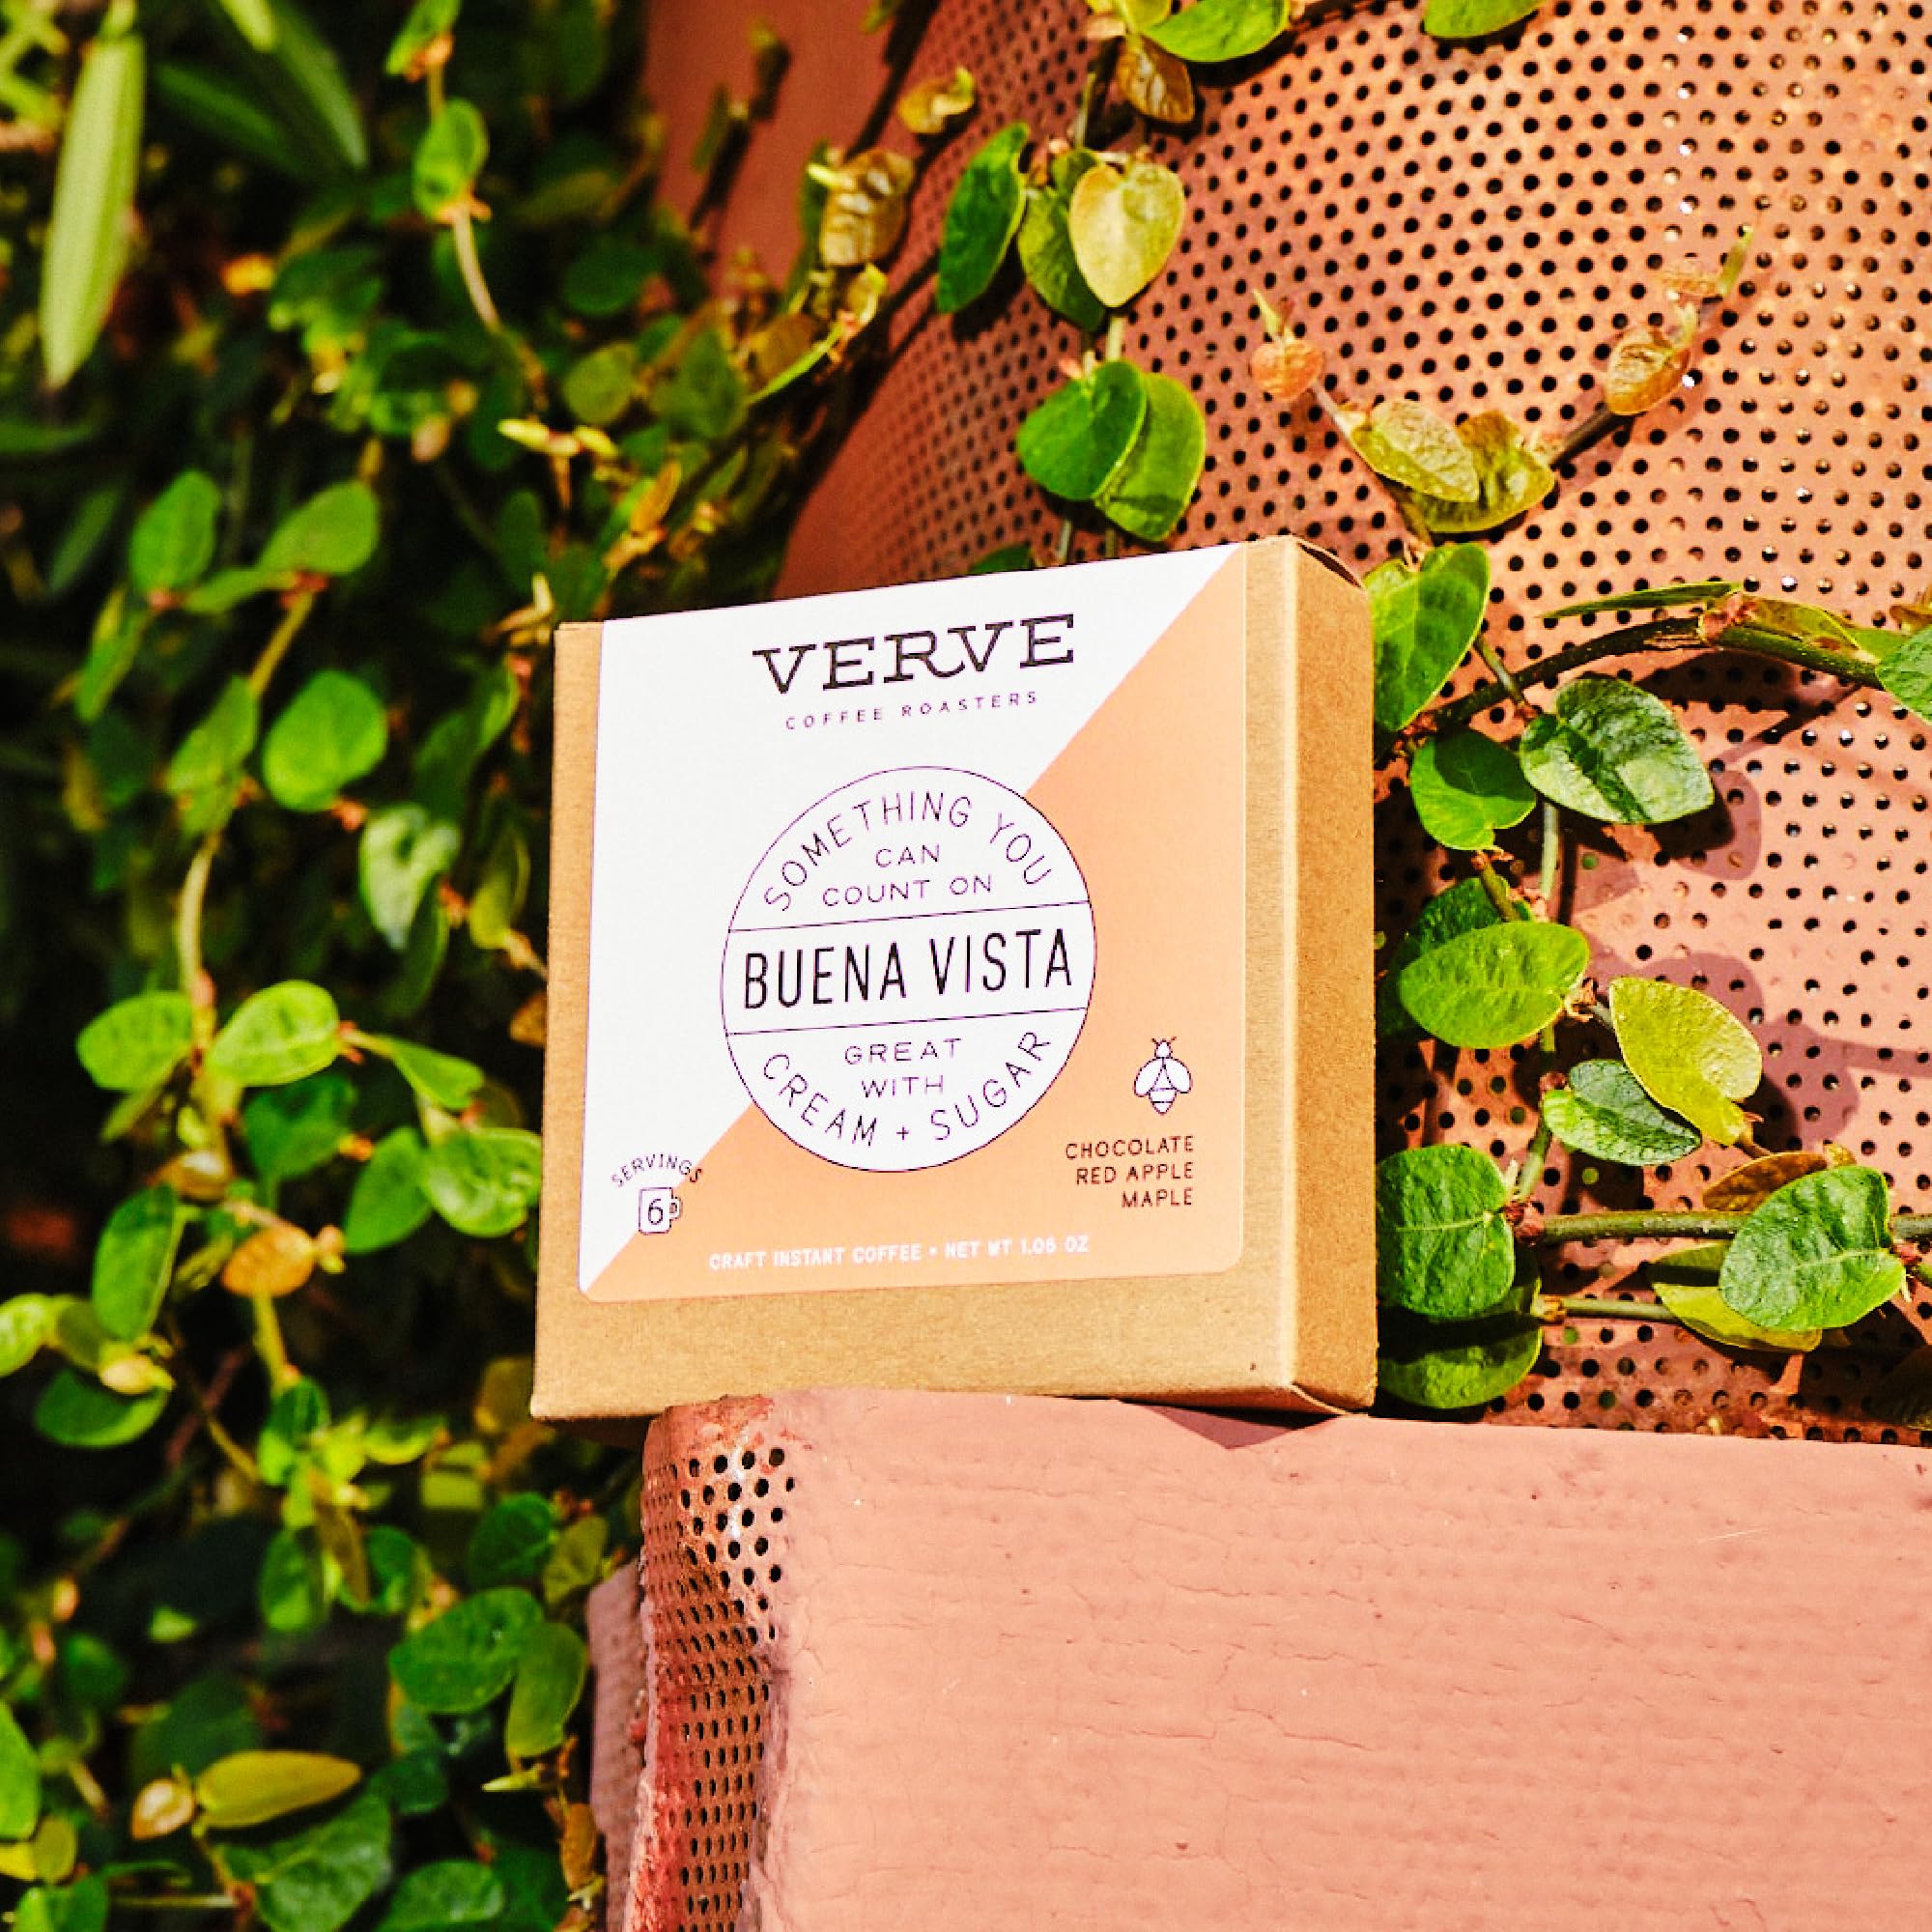 Verve Coffee Roasters Craft Instant Coffee Buena Vista Blend | Dark Roast, Ground, Hand-Roasted | Colombian Blend | Enjoy Hot or Cold | Up to 6 Servings